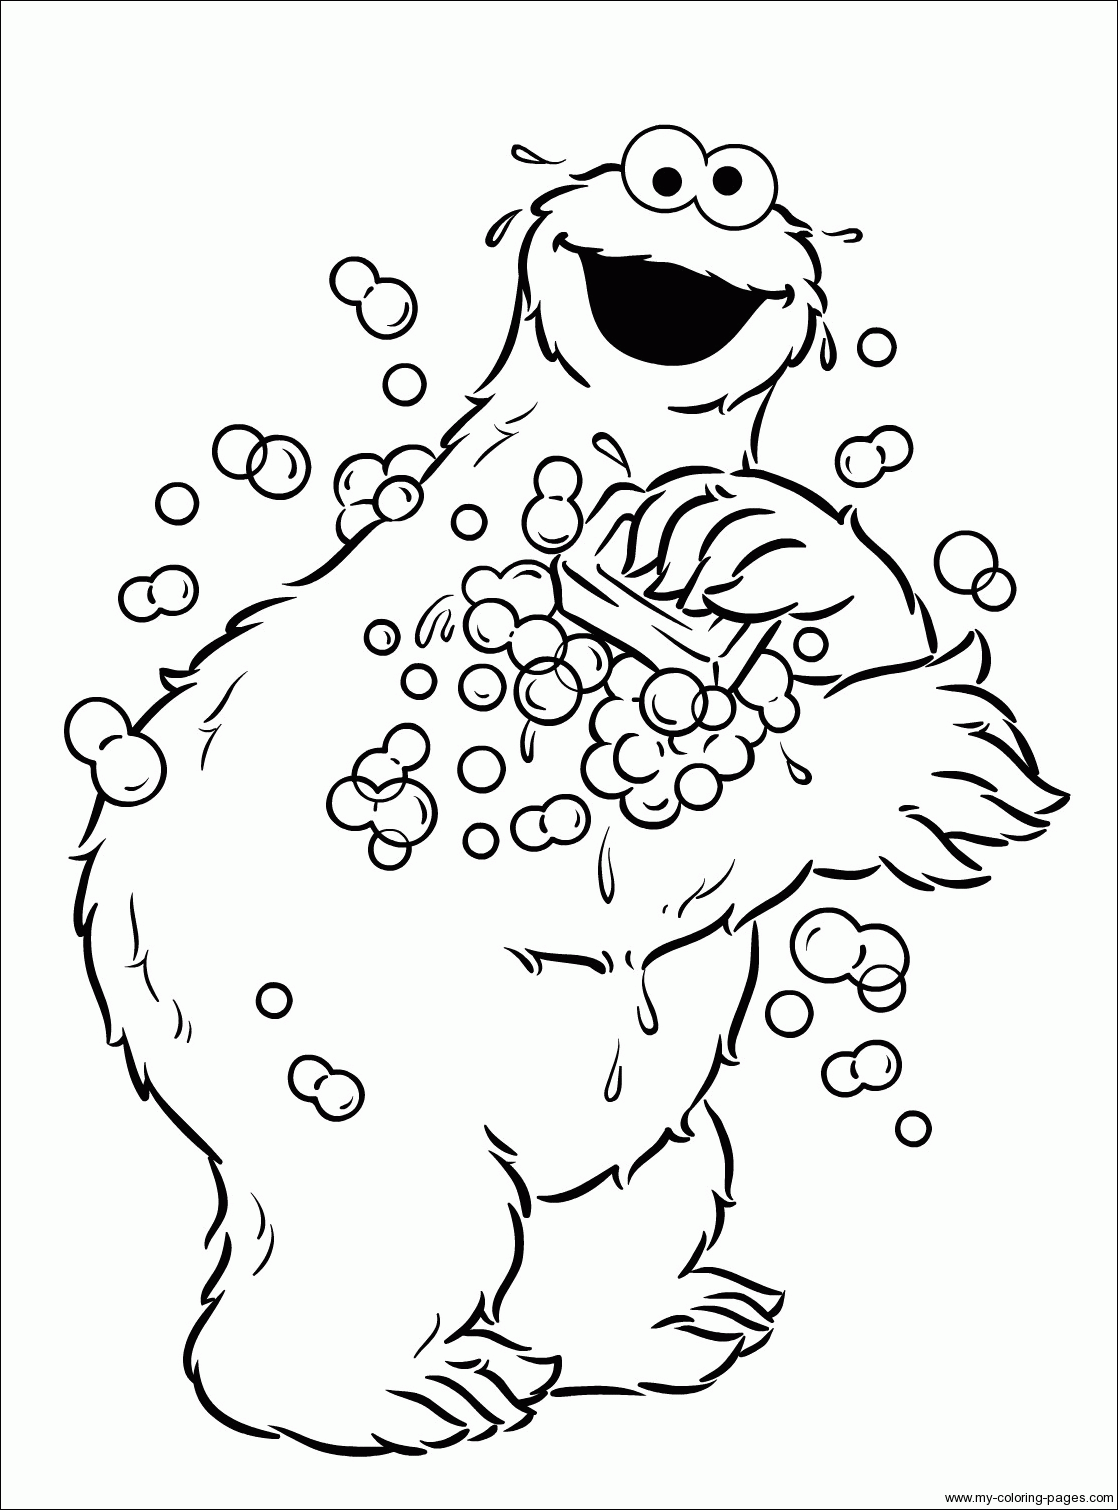 monster coloring sheet monster coloring pages free printables faithfully free sheet coloring monster 1 1